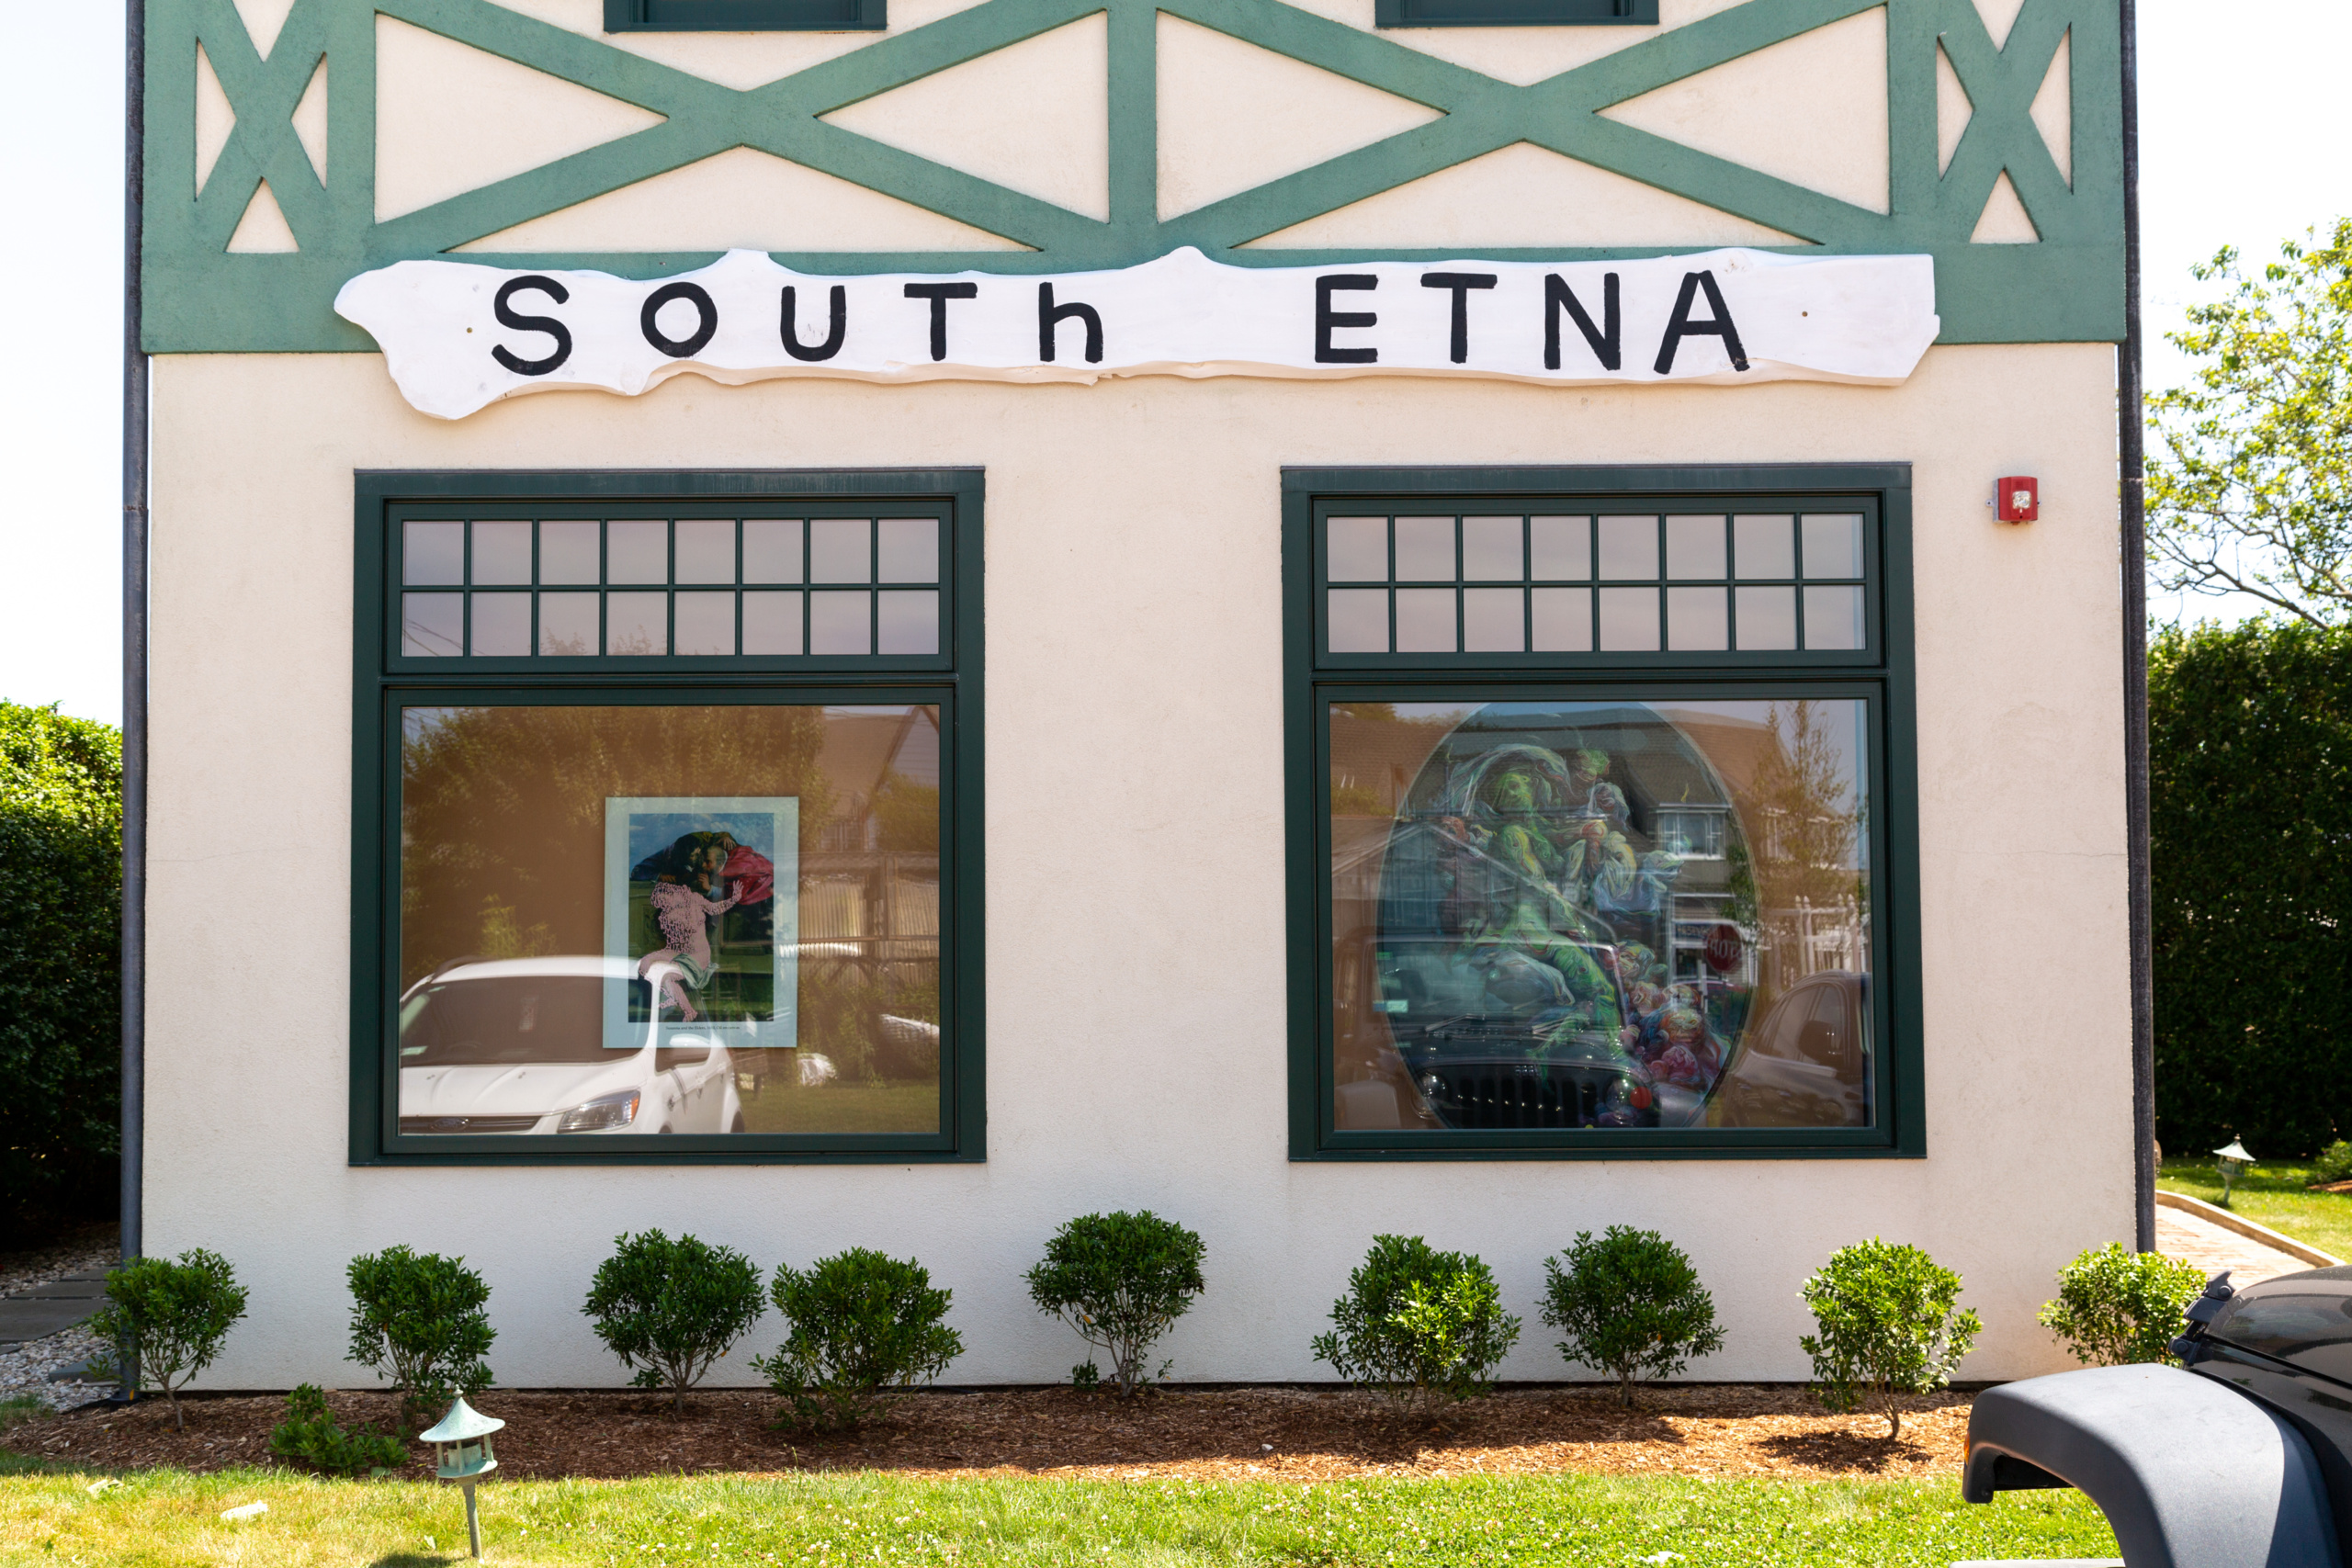 At South Etna Montauk, the gallery's sign was designed by Julian Schnabel. Artworks (in window) by Betty Tompkins (left) and Glenn Brown. Courtesy of South Etna Montauk.